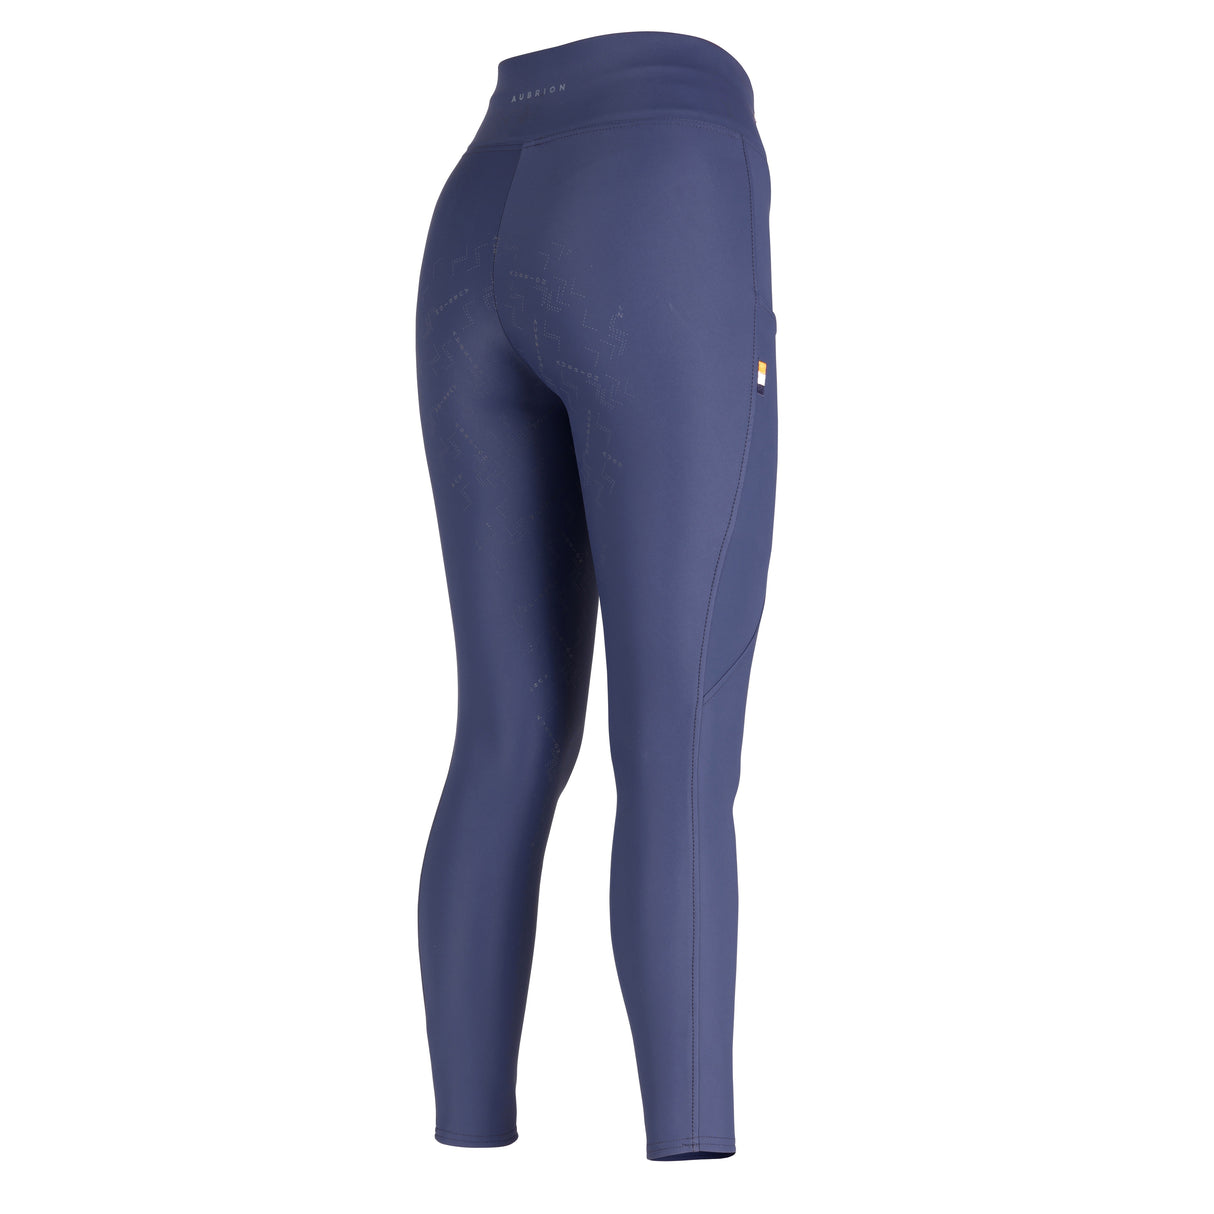 Shires Aubrion Optima Sports Riding Tights #colour_navy